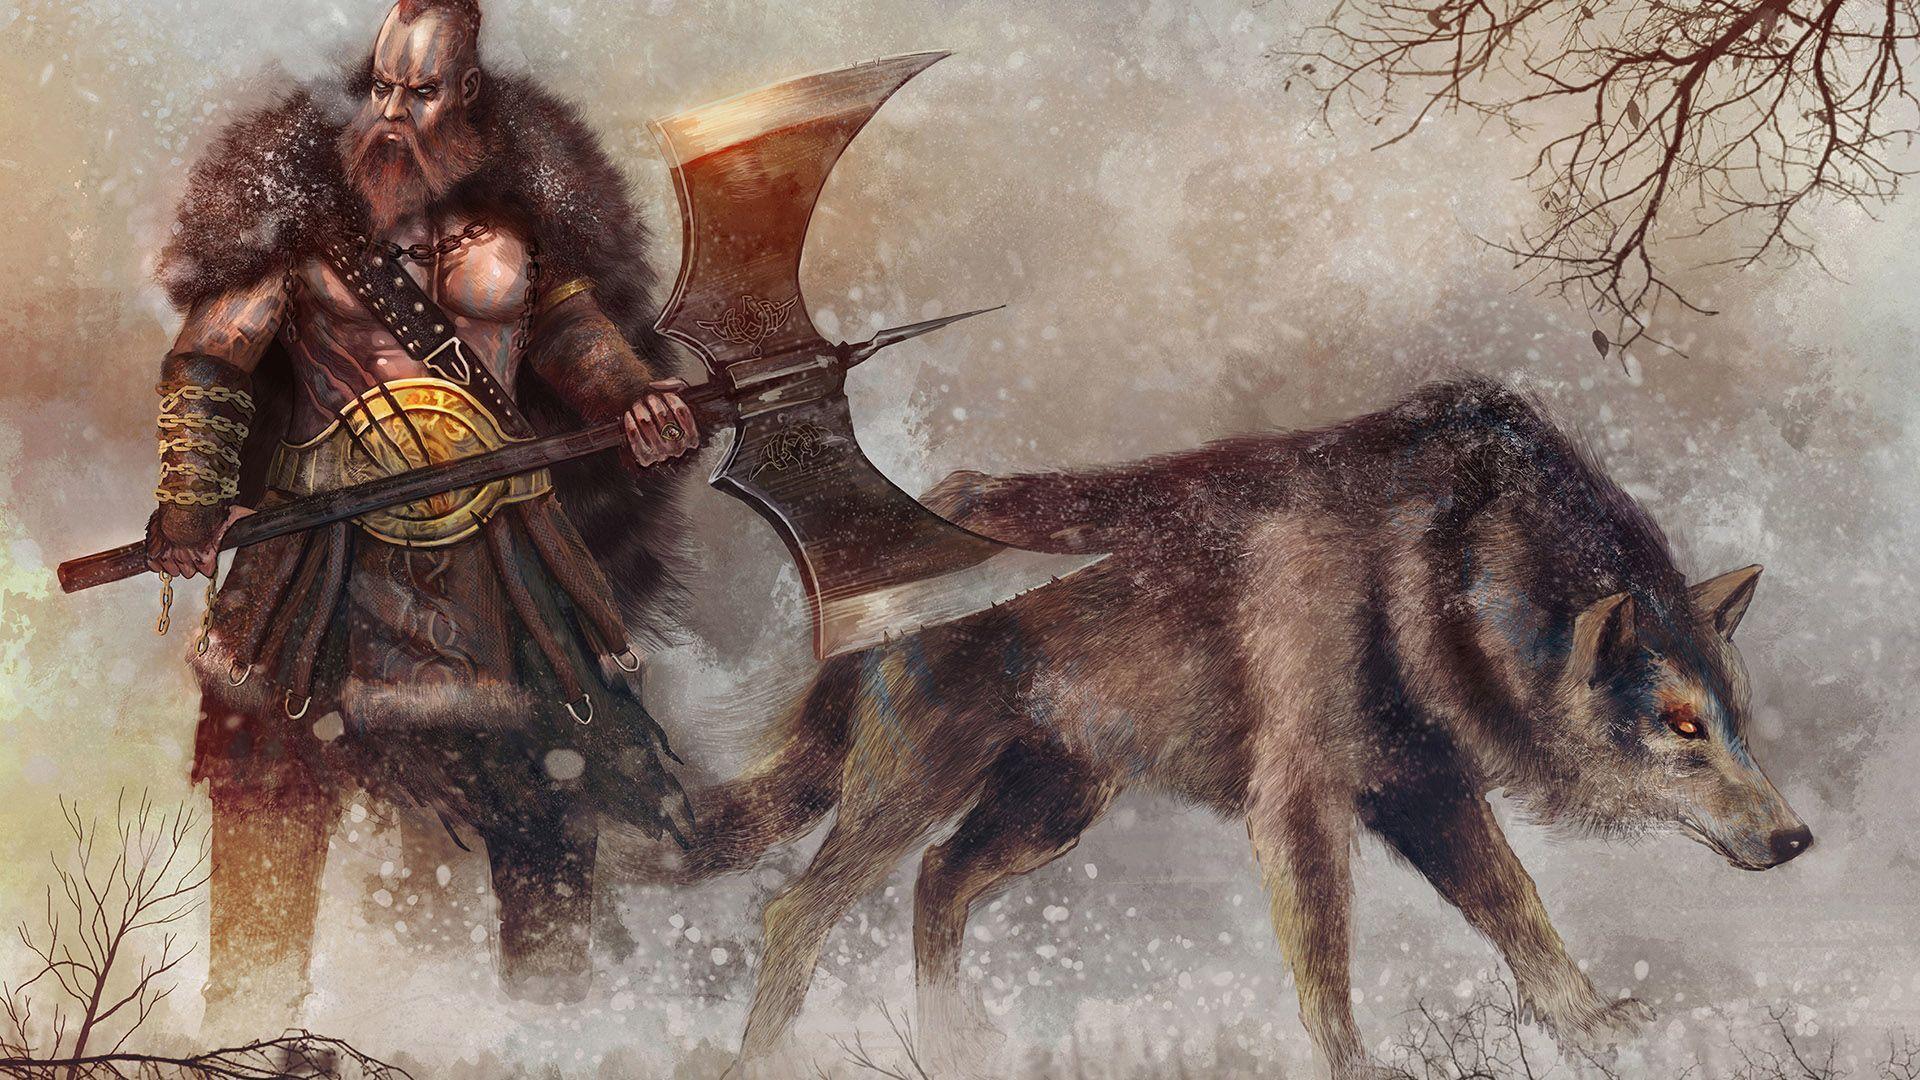 HD Warrior and his wolf in the snow Wallpaper. Download